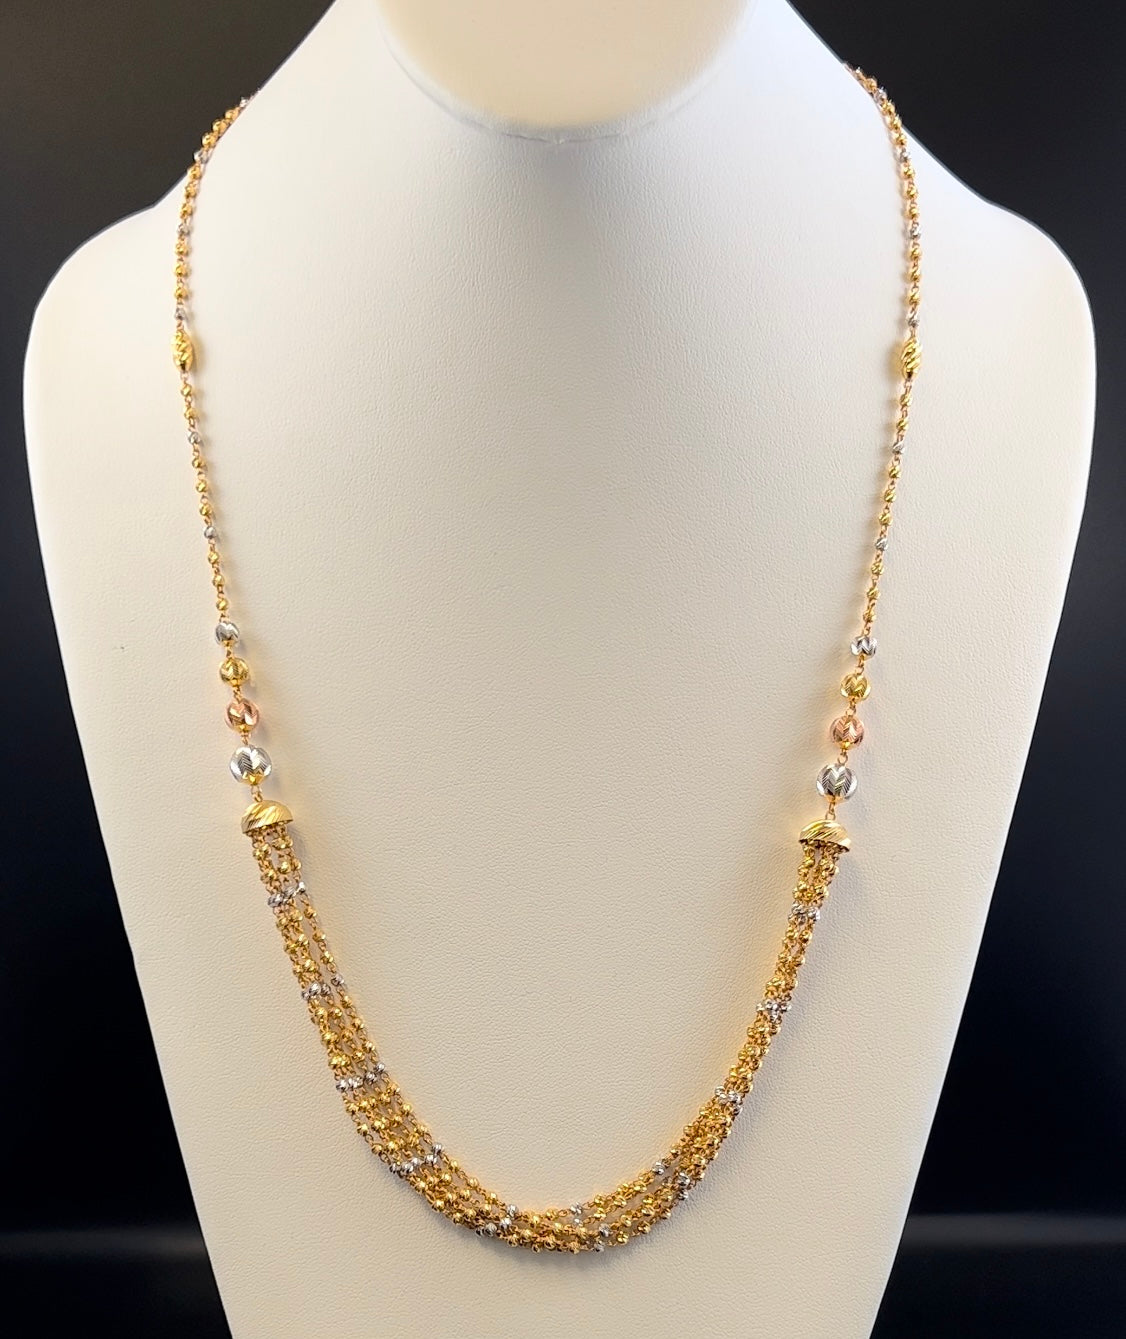 Stunning Multi-Chain Necklace with Tiny Golden Balls